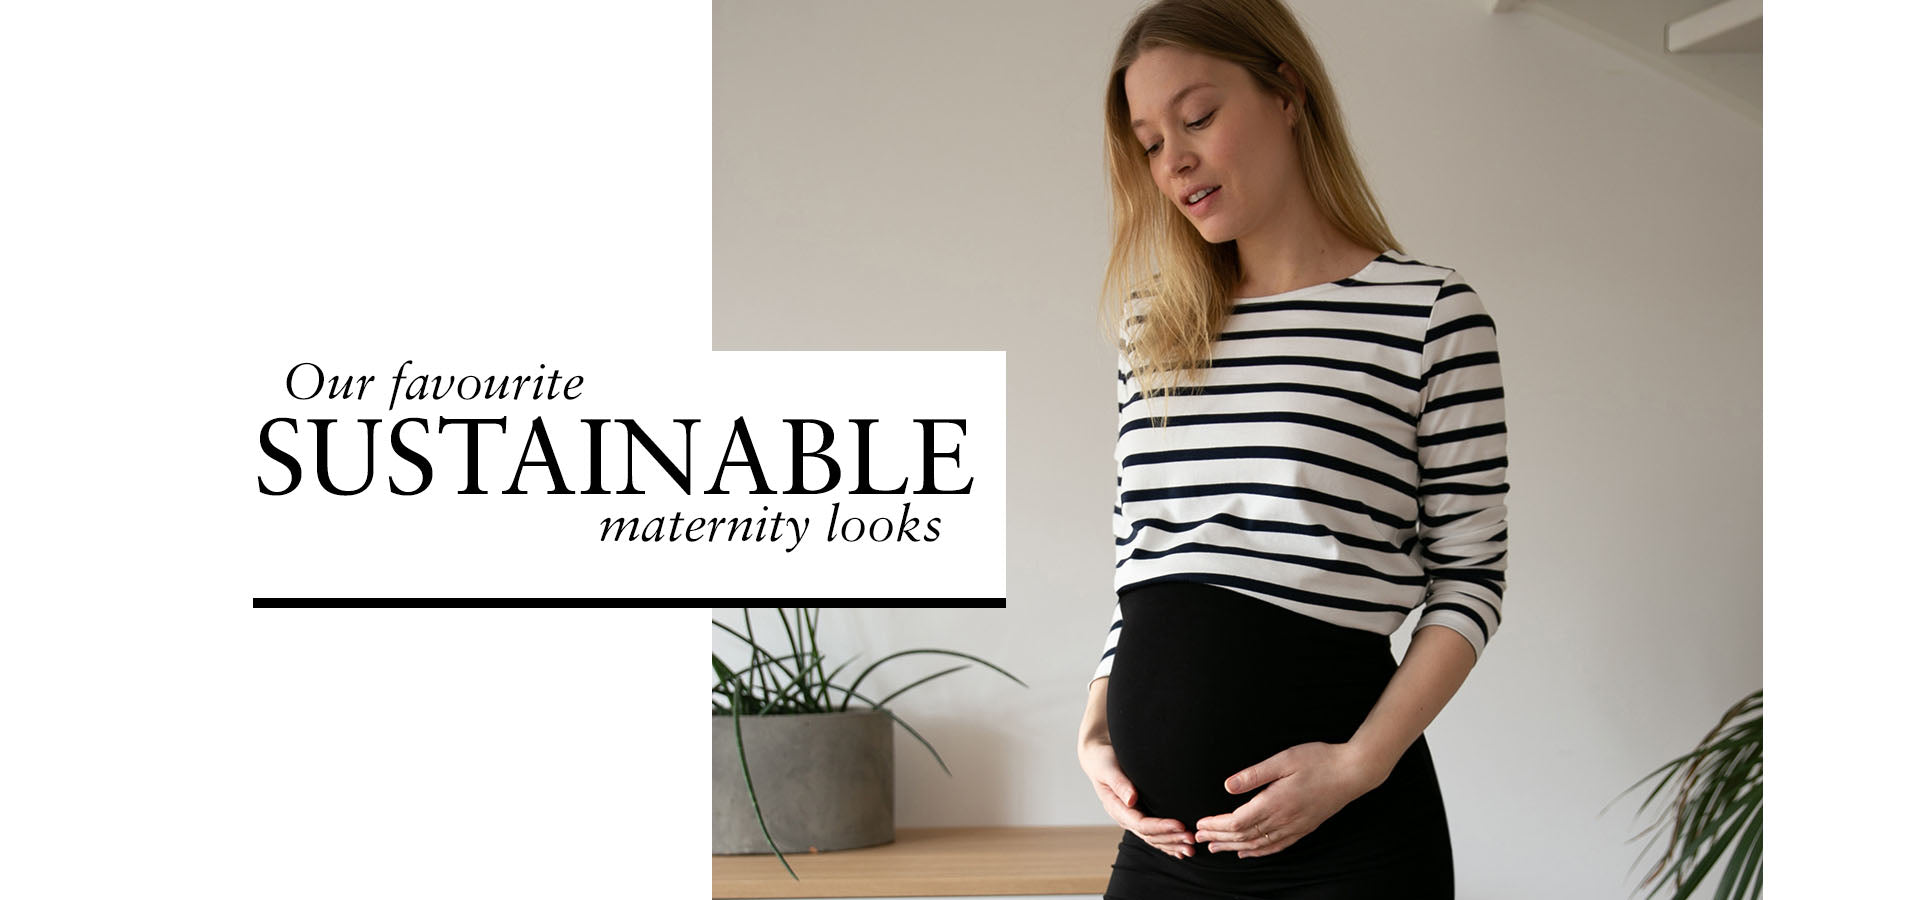 Our favourite sustainable maternity looks